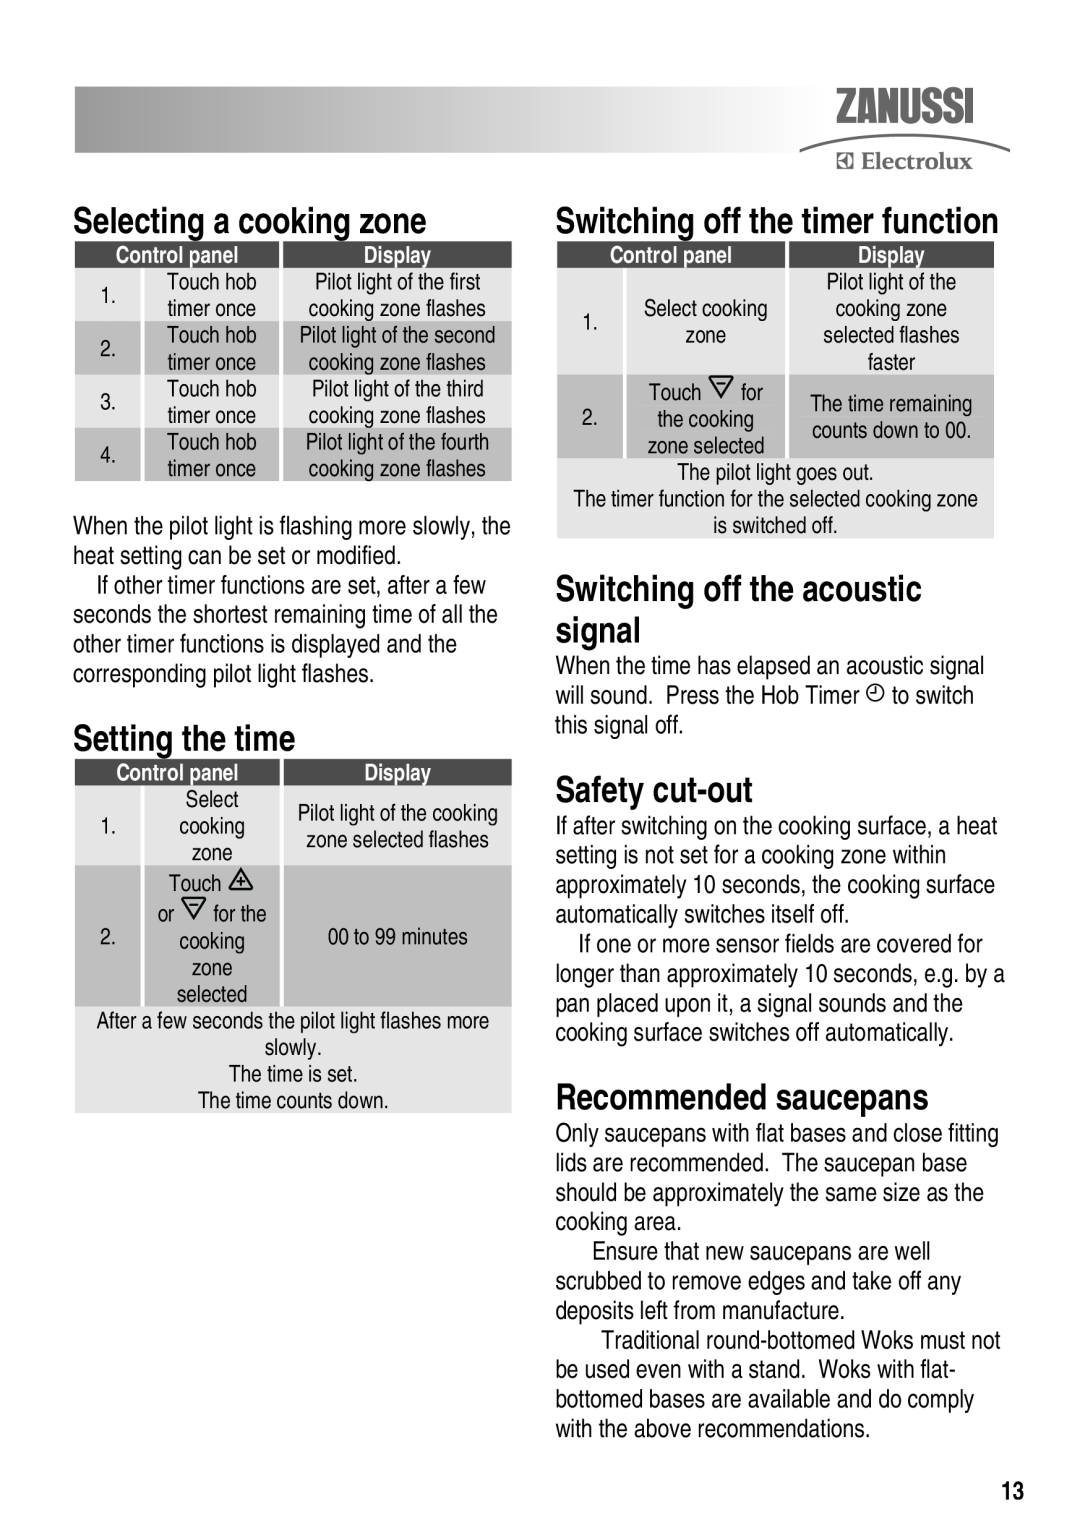 Zanussi ZKT6050 user manual Selecting a cooking zone, Setting the time, Switching off the acoustic signal, Safety cut-out 